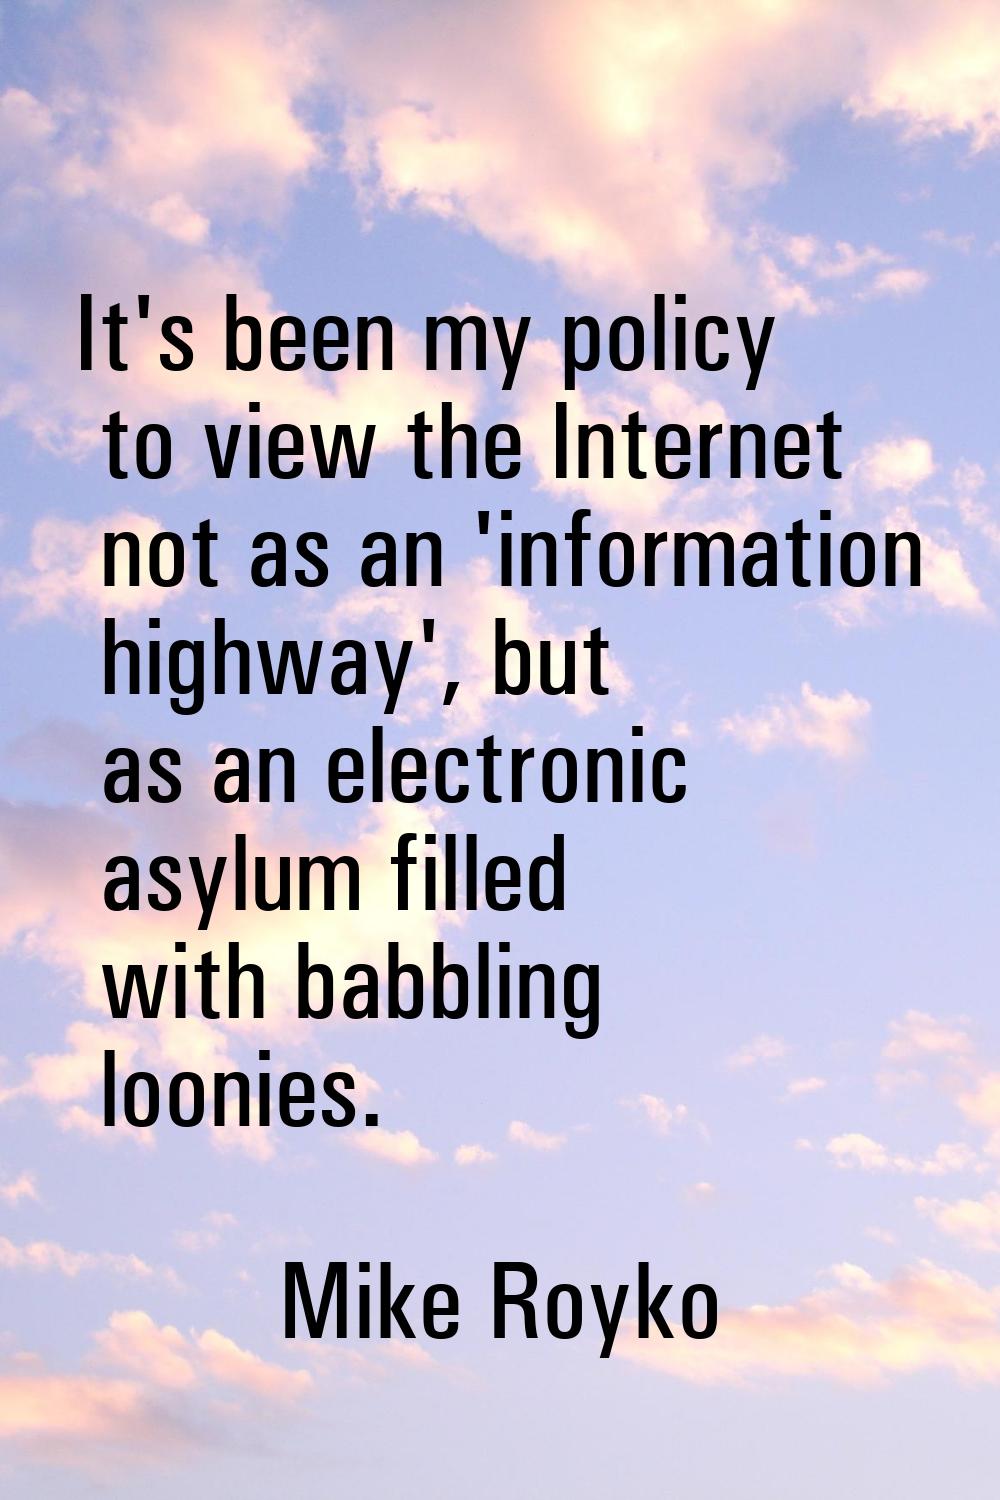 It's been my policy to view the Internet not as an 'information highway', but as an electronic asyl